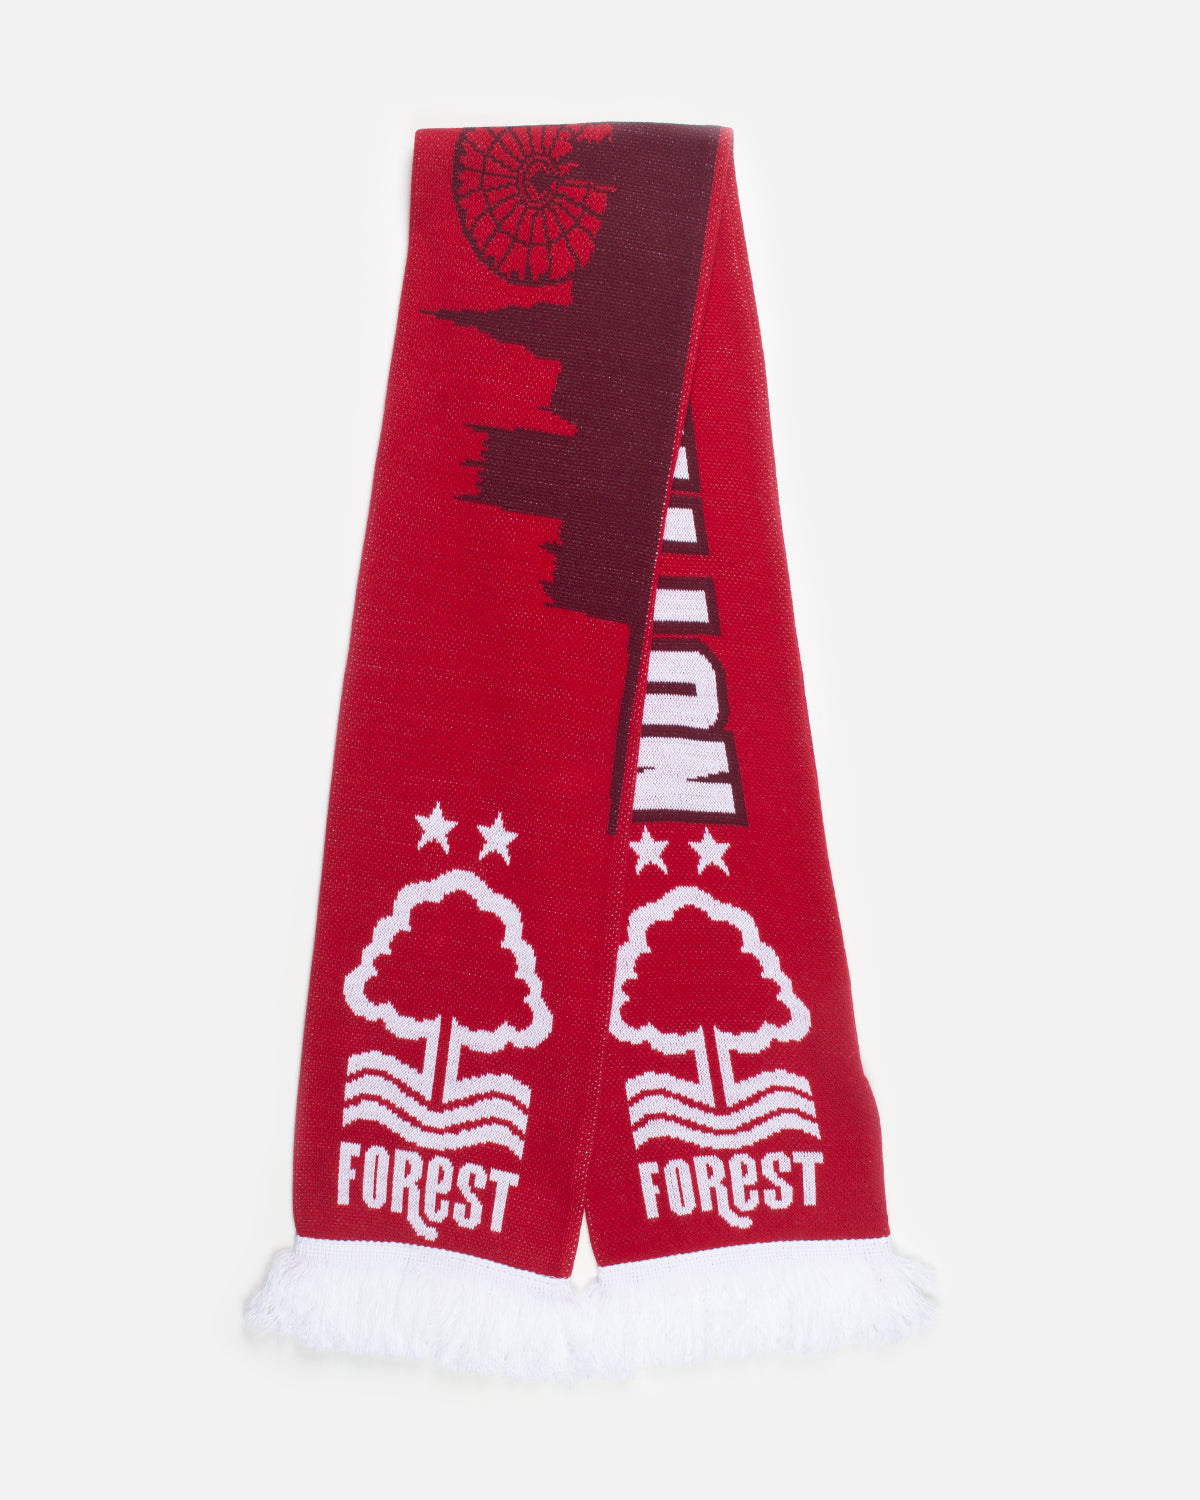 NFFC City Scape Scarf